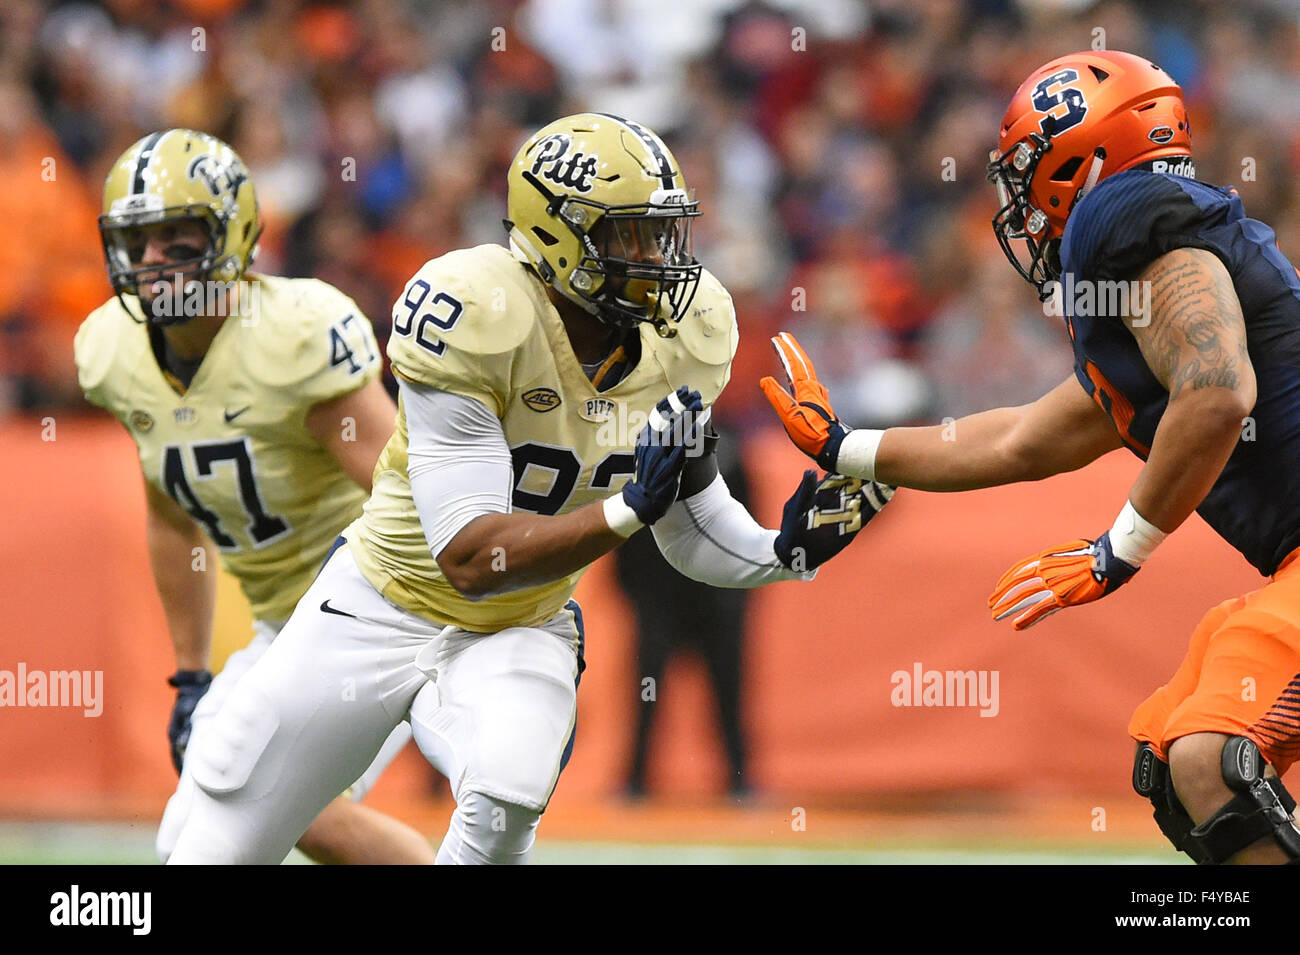 Syracuse, New York, USA. 24th Oct, 2015. Pittsburgh Panthers defensive lineman Rori Blair (92) during game action against the Syracuse Orange during the second quarter of an NCAA football game on Saturday, October 24, 2015, at the Carrier Dome in Syracuse, New York. Pittsburgh won the game 23-20. Rich Barnes/CSM/Alamy Live News Stock Photo